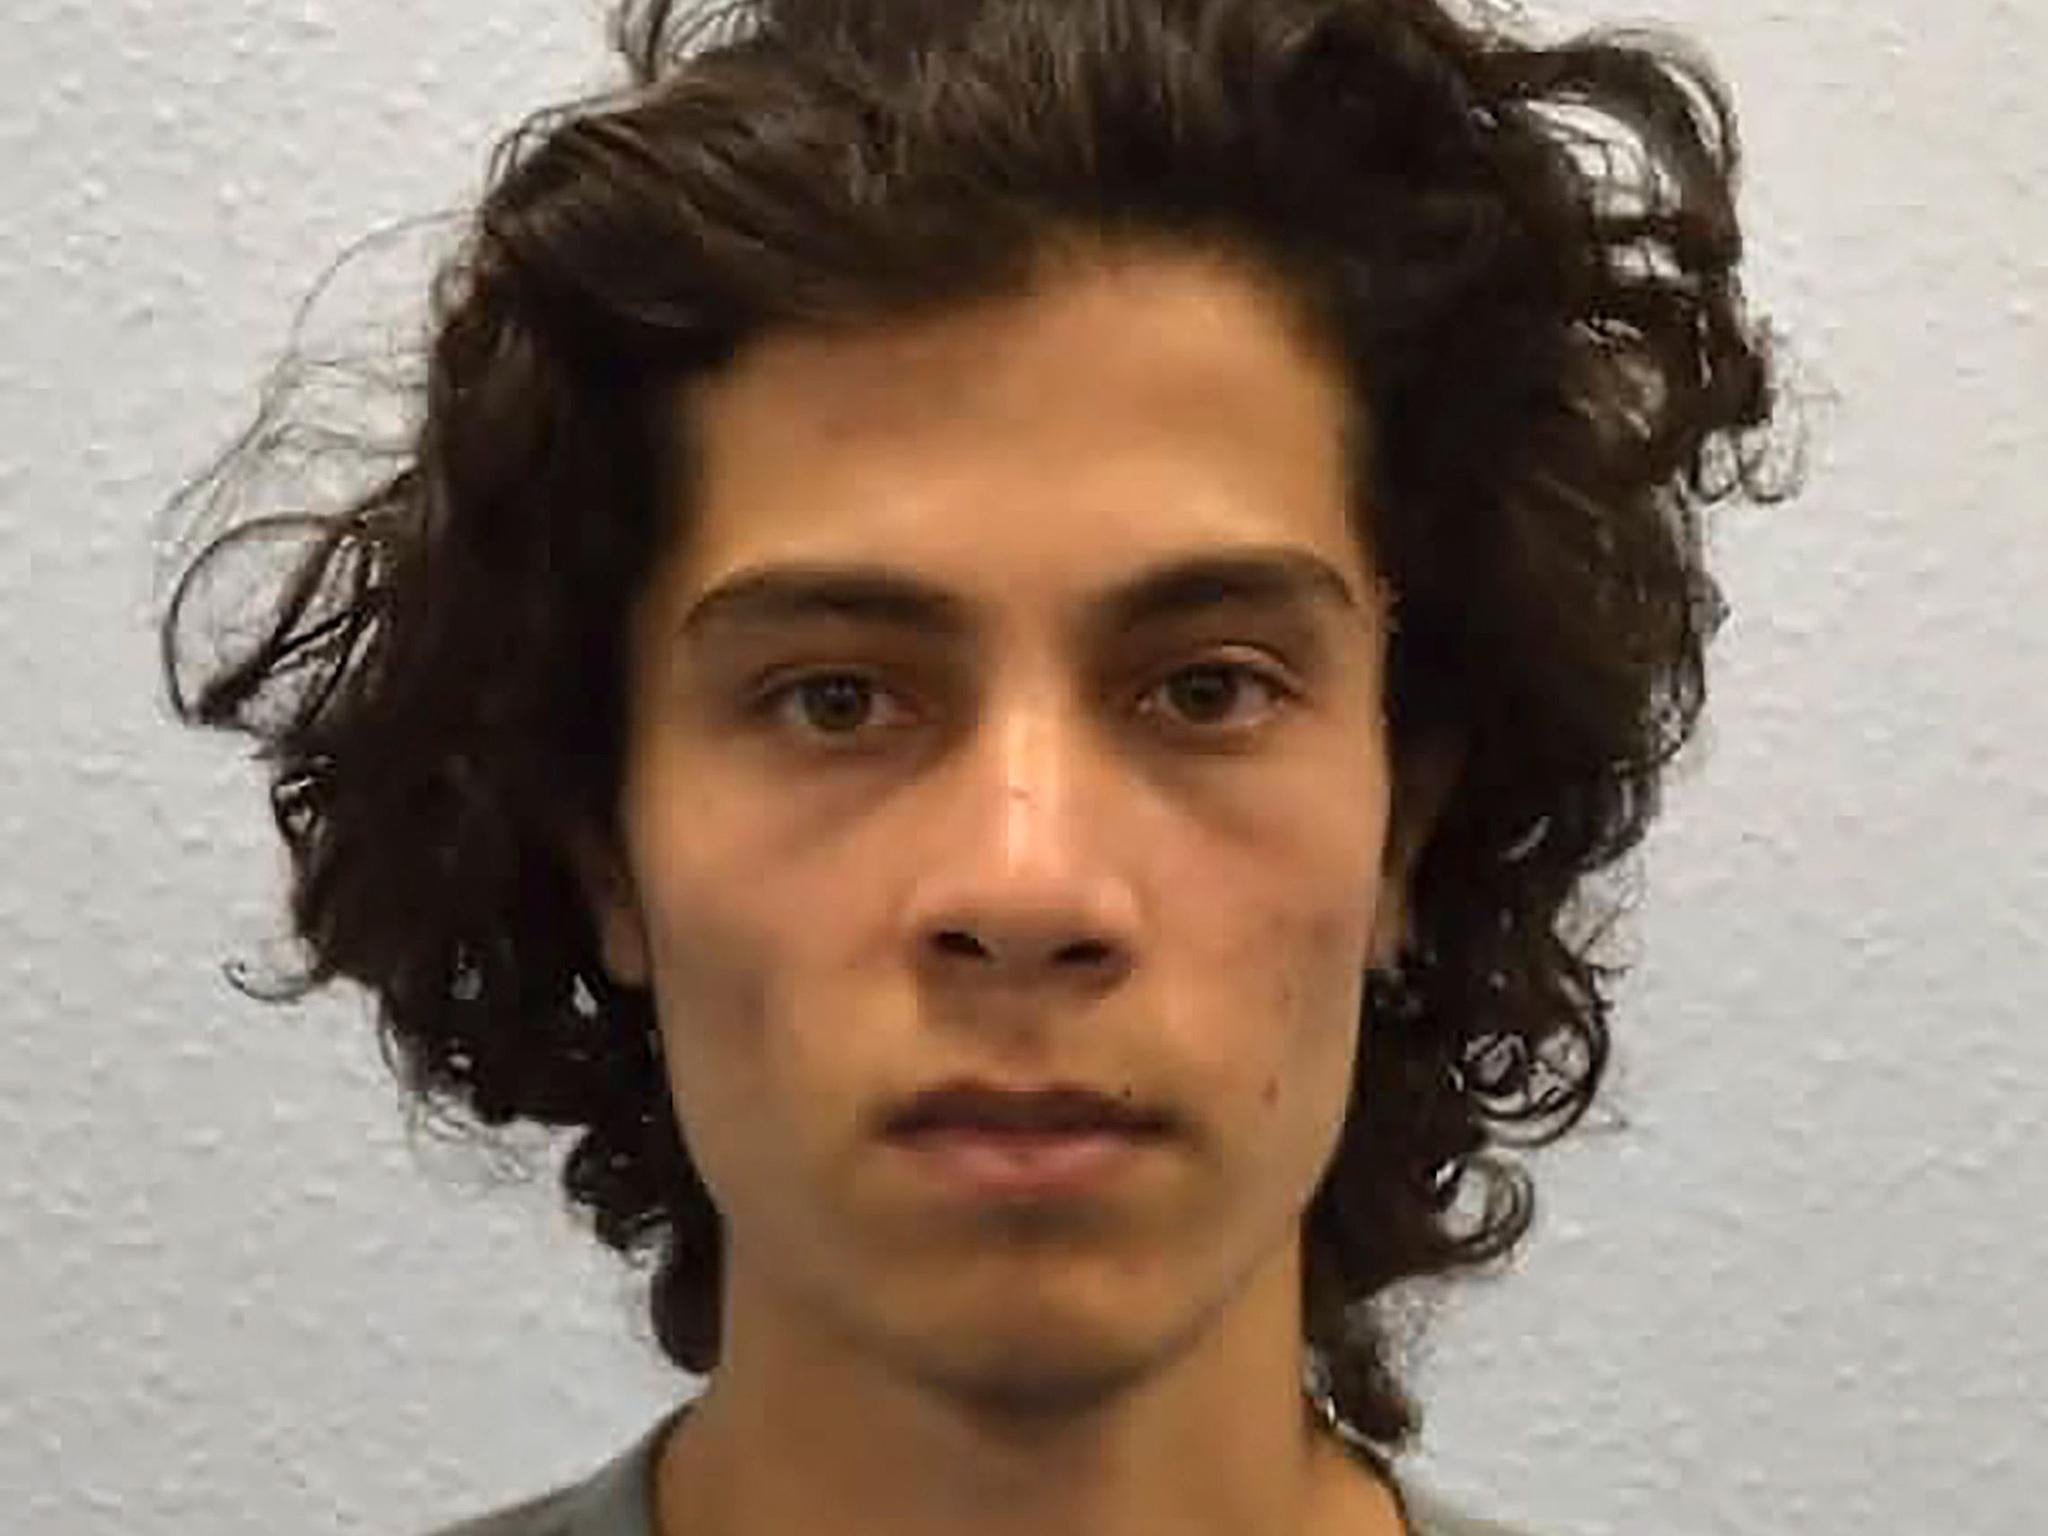 Parsons Green Tube bomber Ahmed Hassan jailed for life for terror attack - as it happened